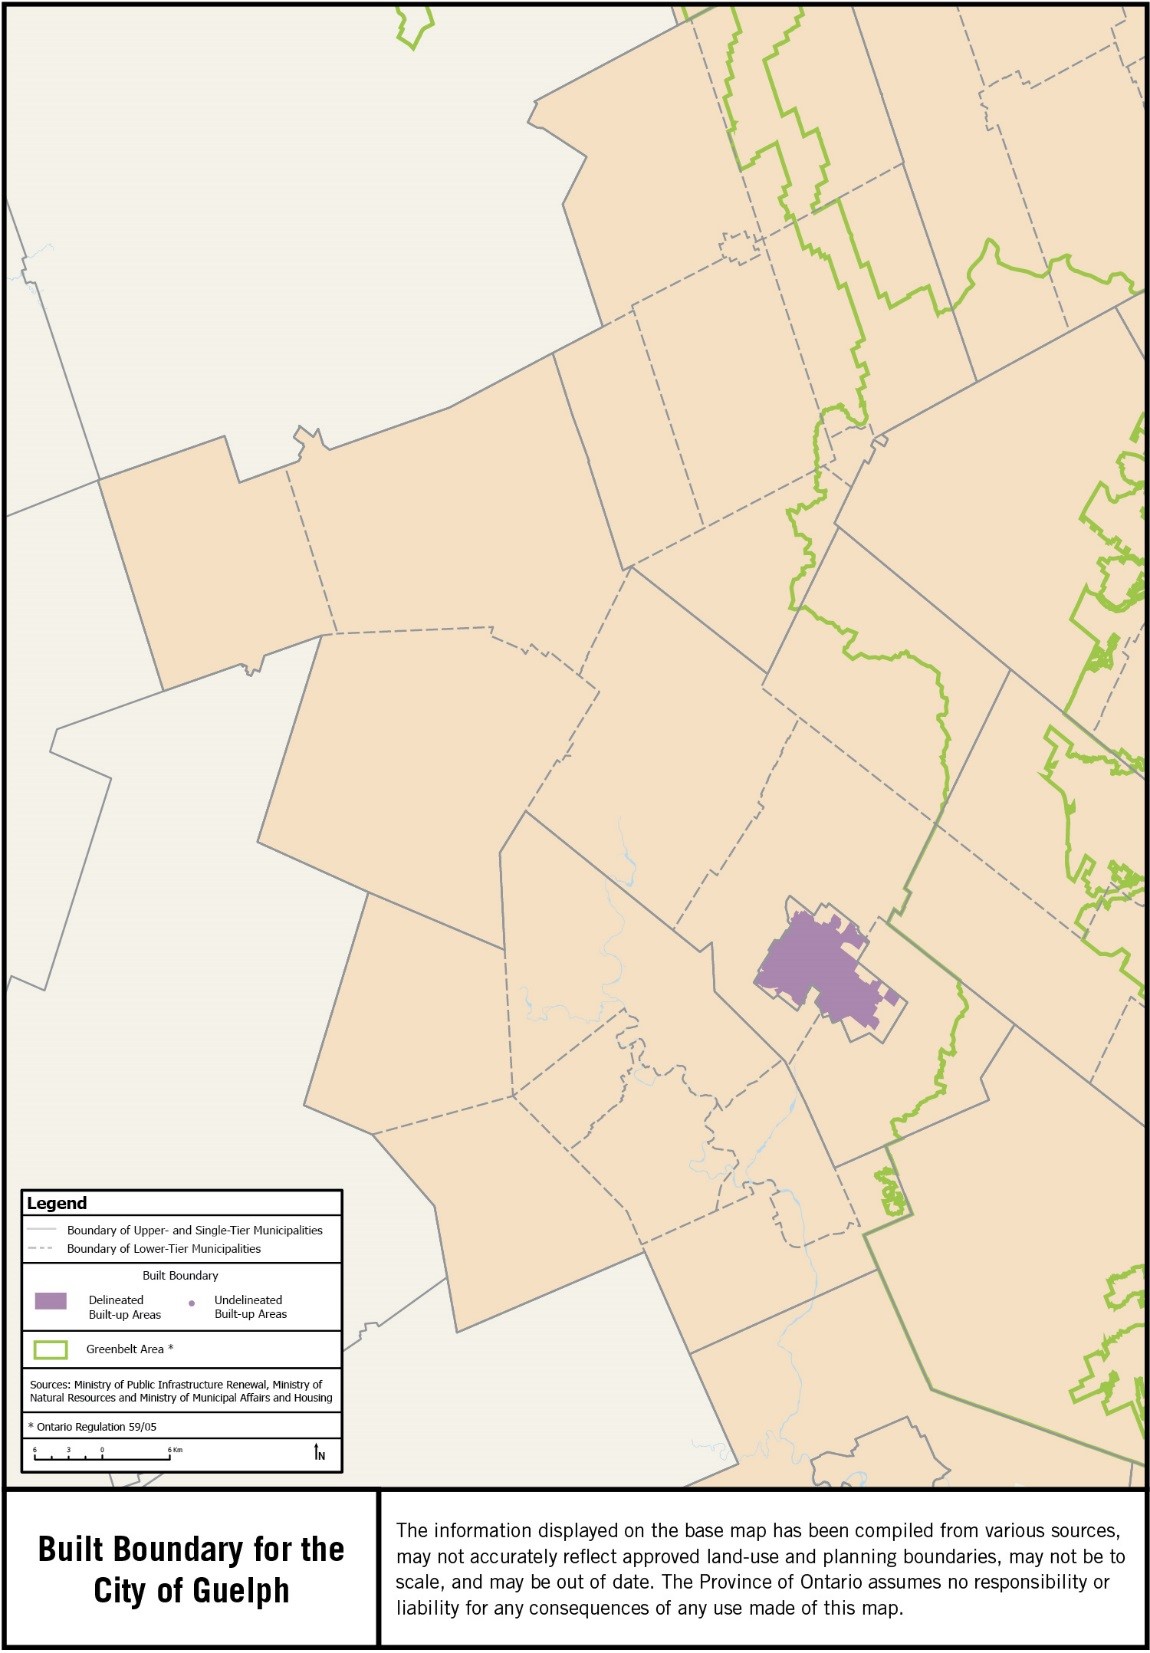 Map showing the built boundary for the City of Guelph.